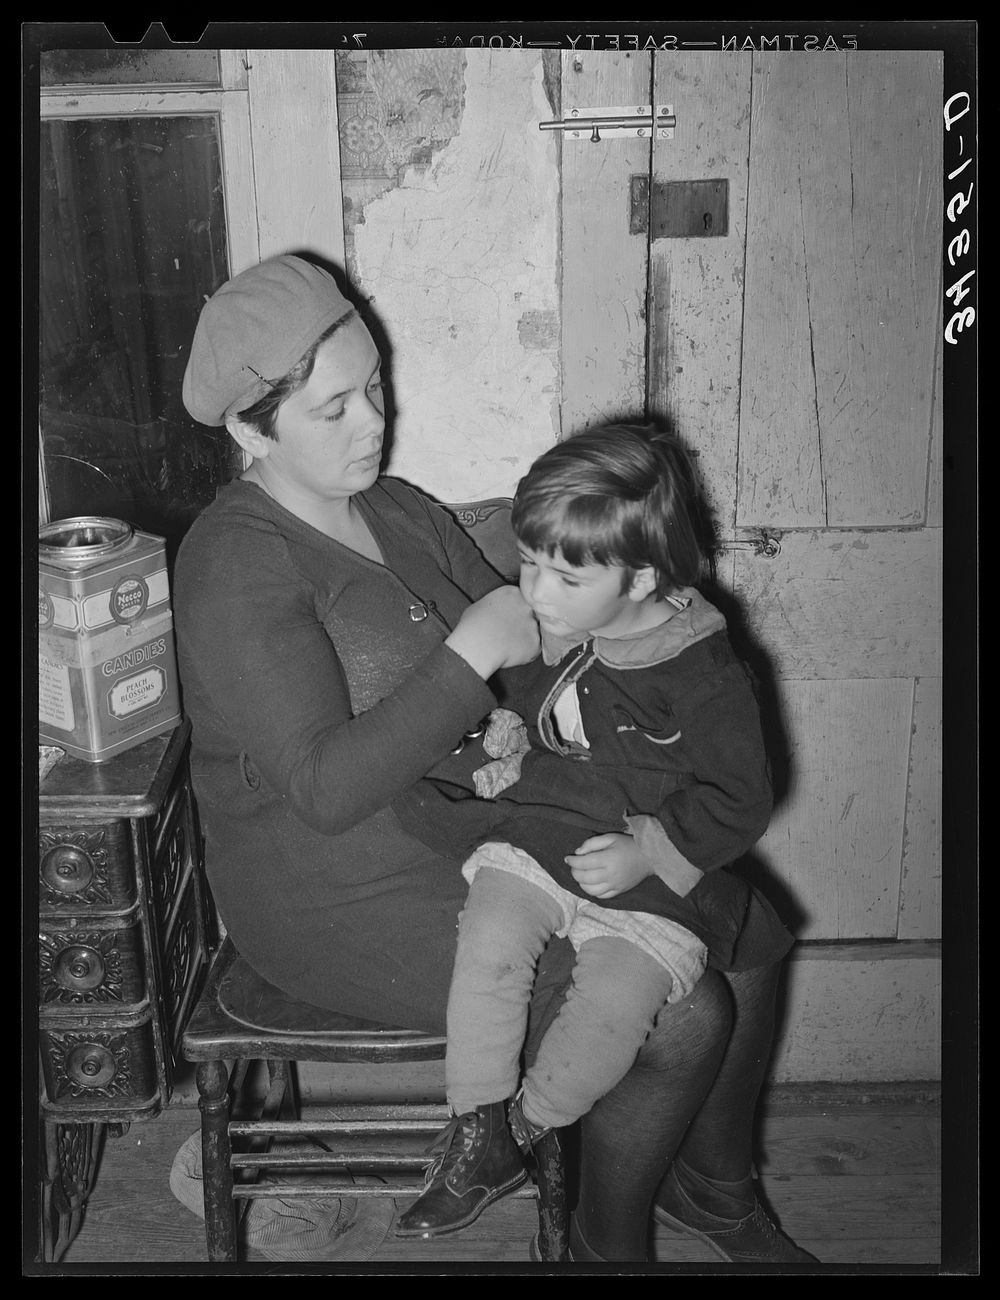 [Untitled photo, possibly related to: Wife of FSA (Farm Security Administration) client fixing her daughter's hair. Farm…